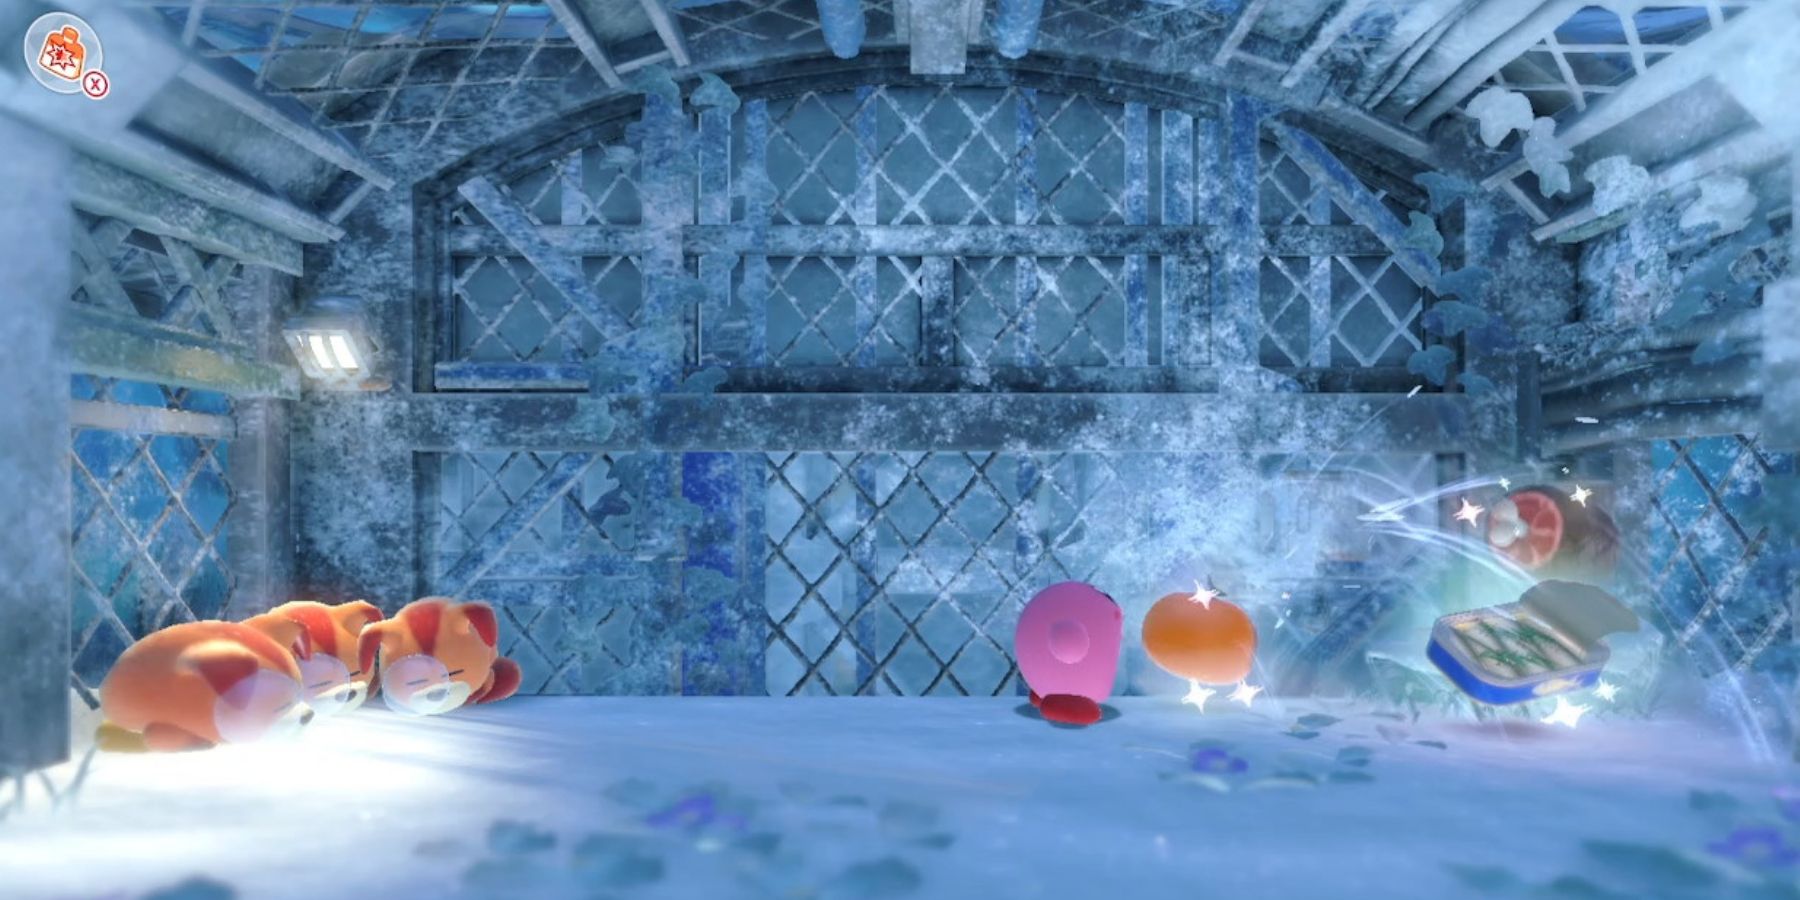 Wondaria Remains hidden Waddle Dee locations in Kirby and the